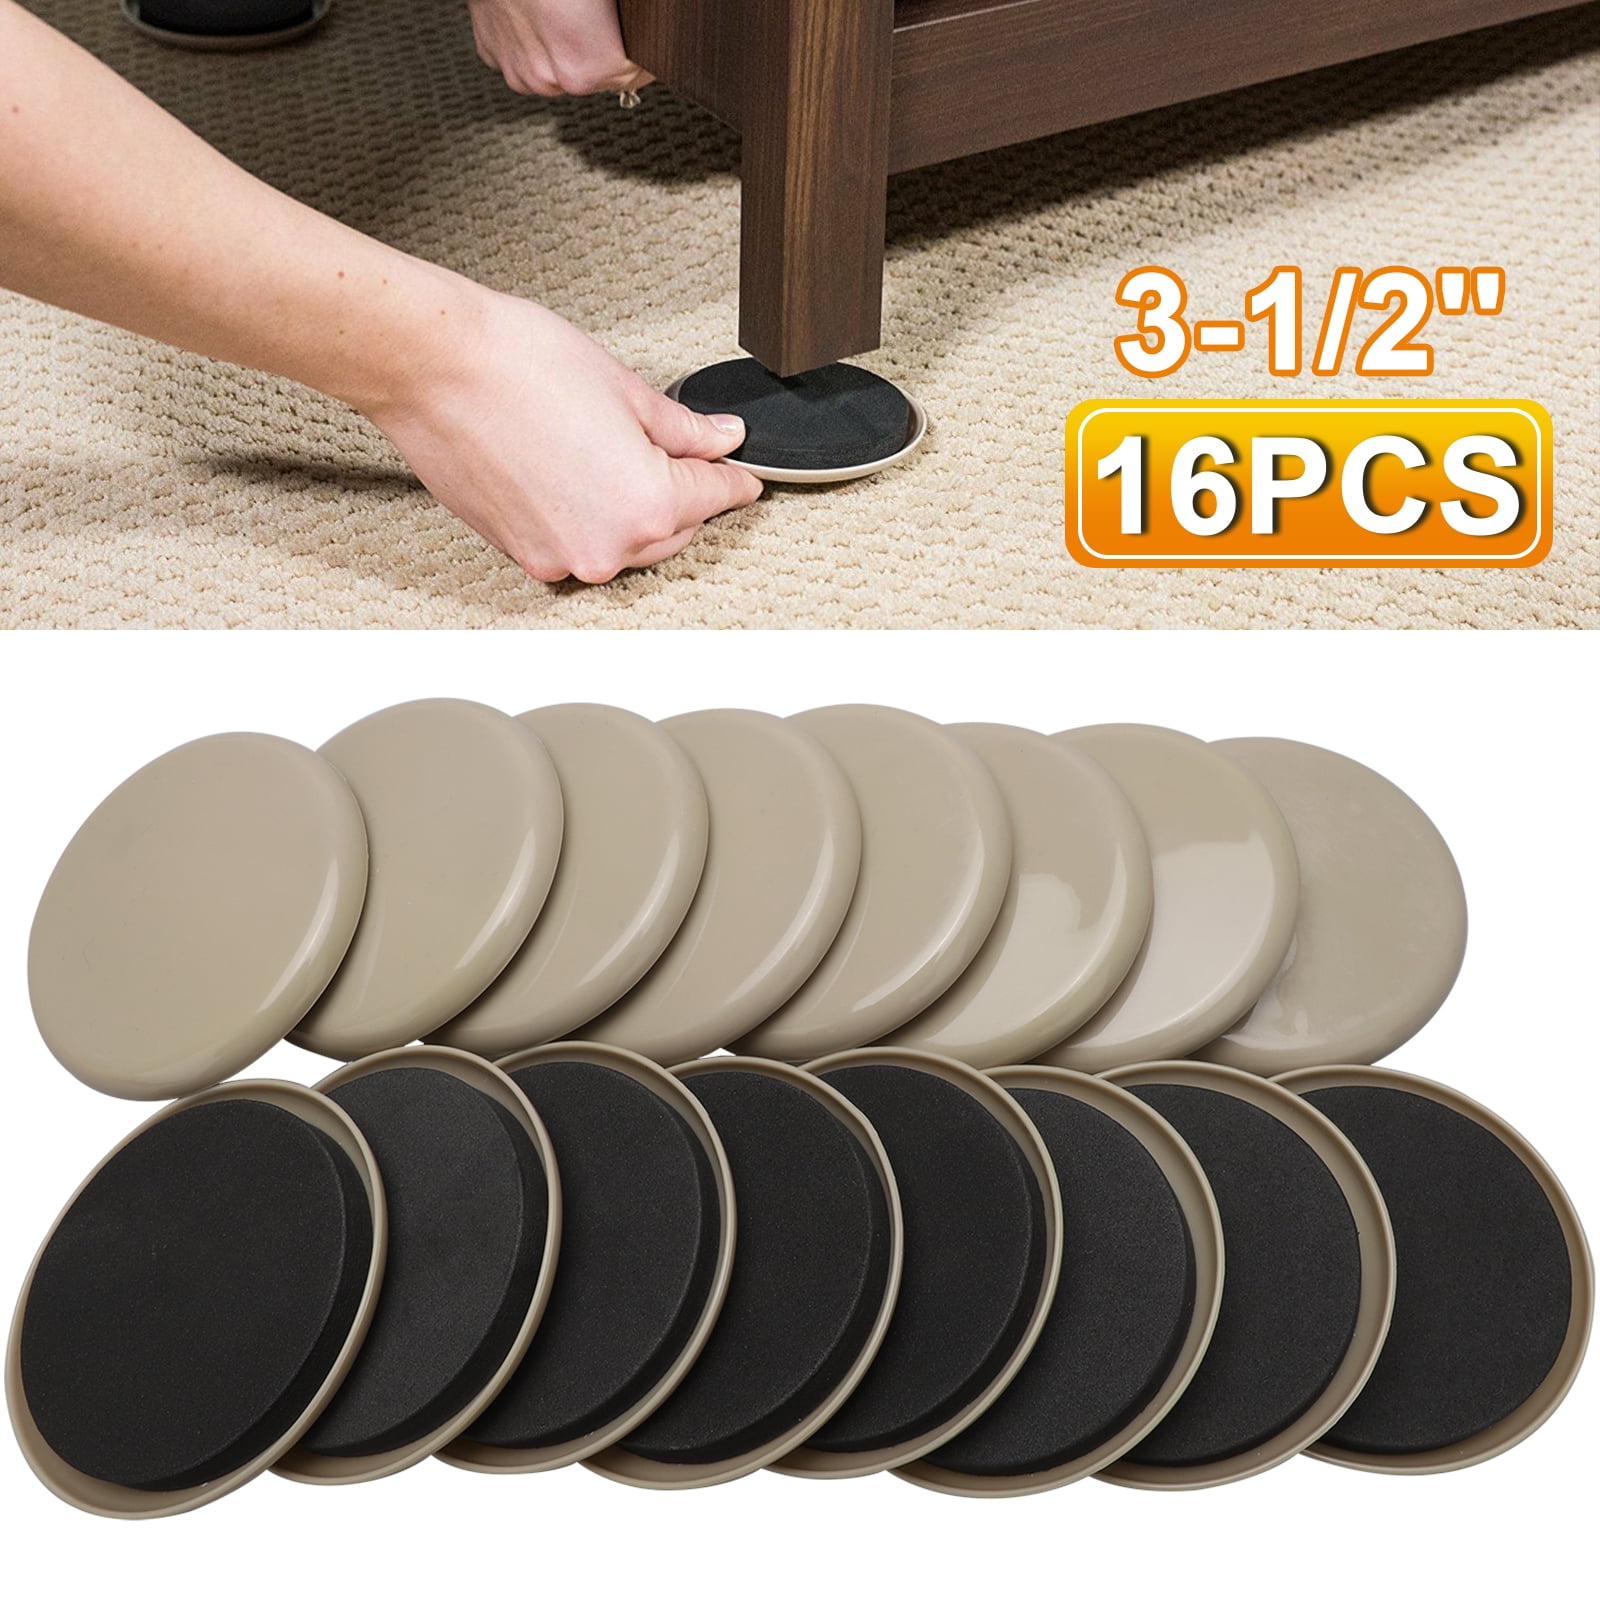 Furniture Sliders Pads Movers Carpet Wood Floors Moving Heavy Household New 